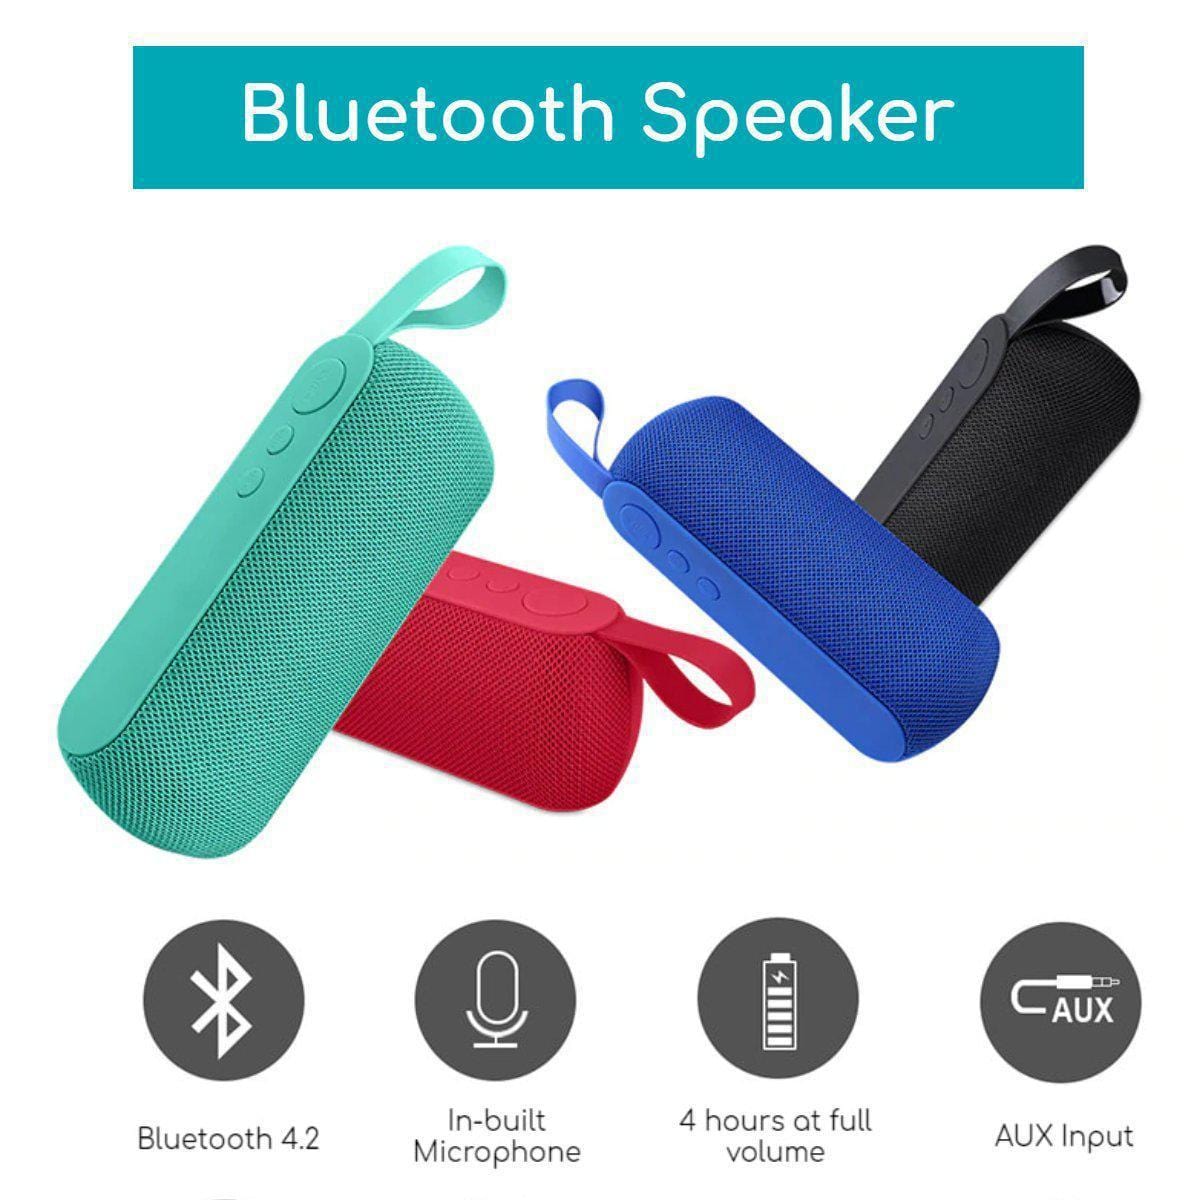 HypedEffect Built-in Microphone Bluetooth Portable Speaker 4.2